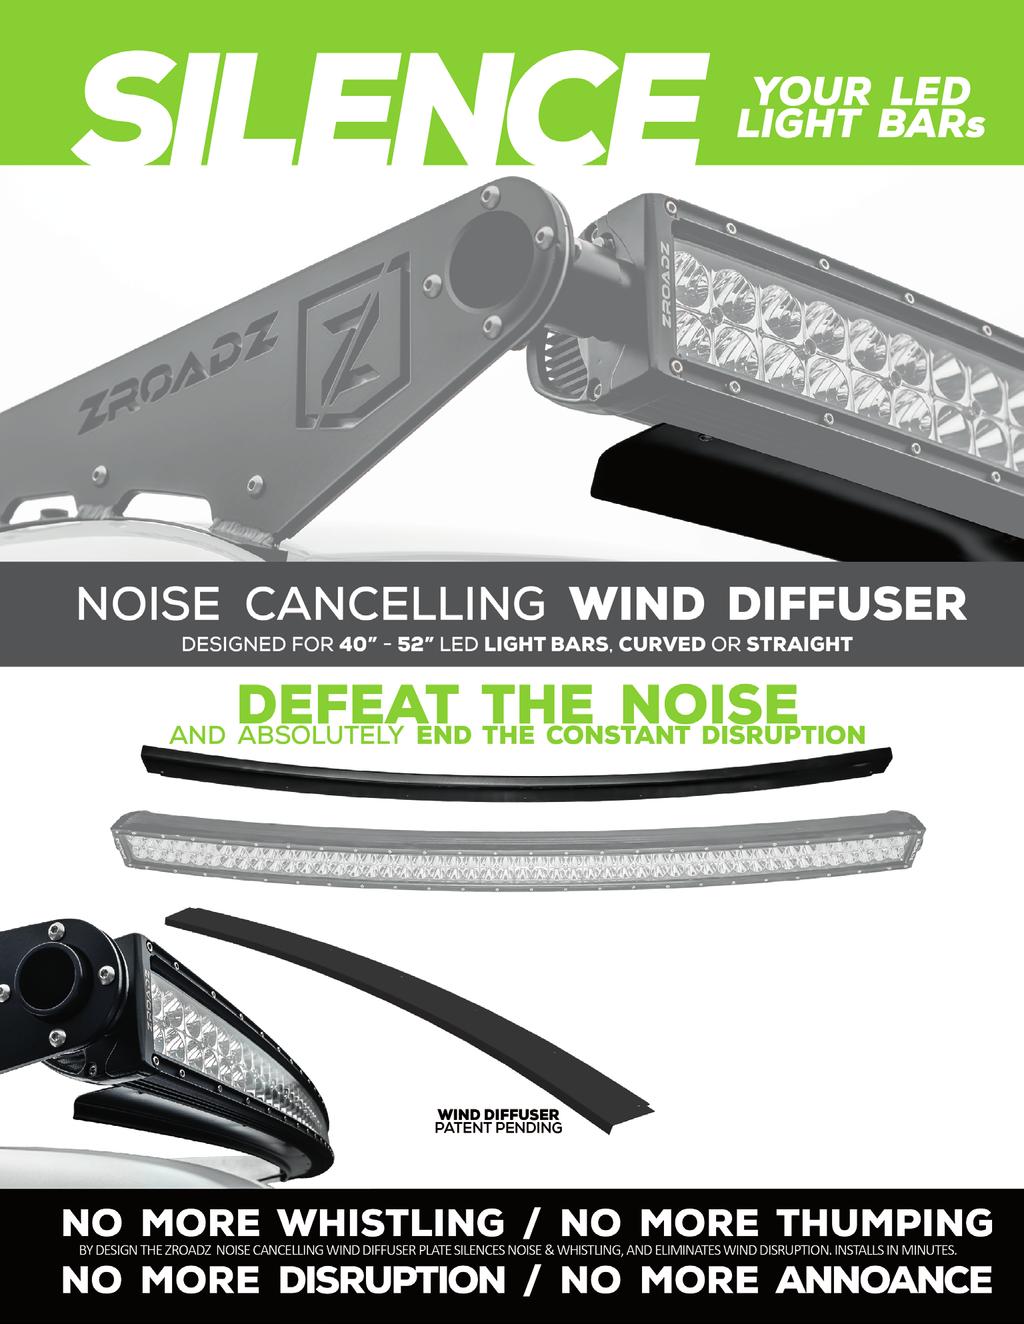 NOISE CANCELLING WIND DIFFUSERS DESCRIPTION BLADE DEPTH Z330052C 52" Curved Wind Diffuser 2.25" Z330052S 52" Straight Wind Diffuser 2.